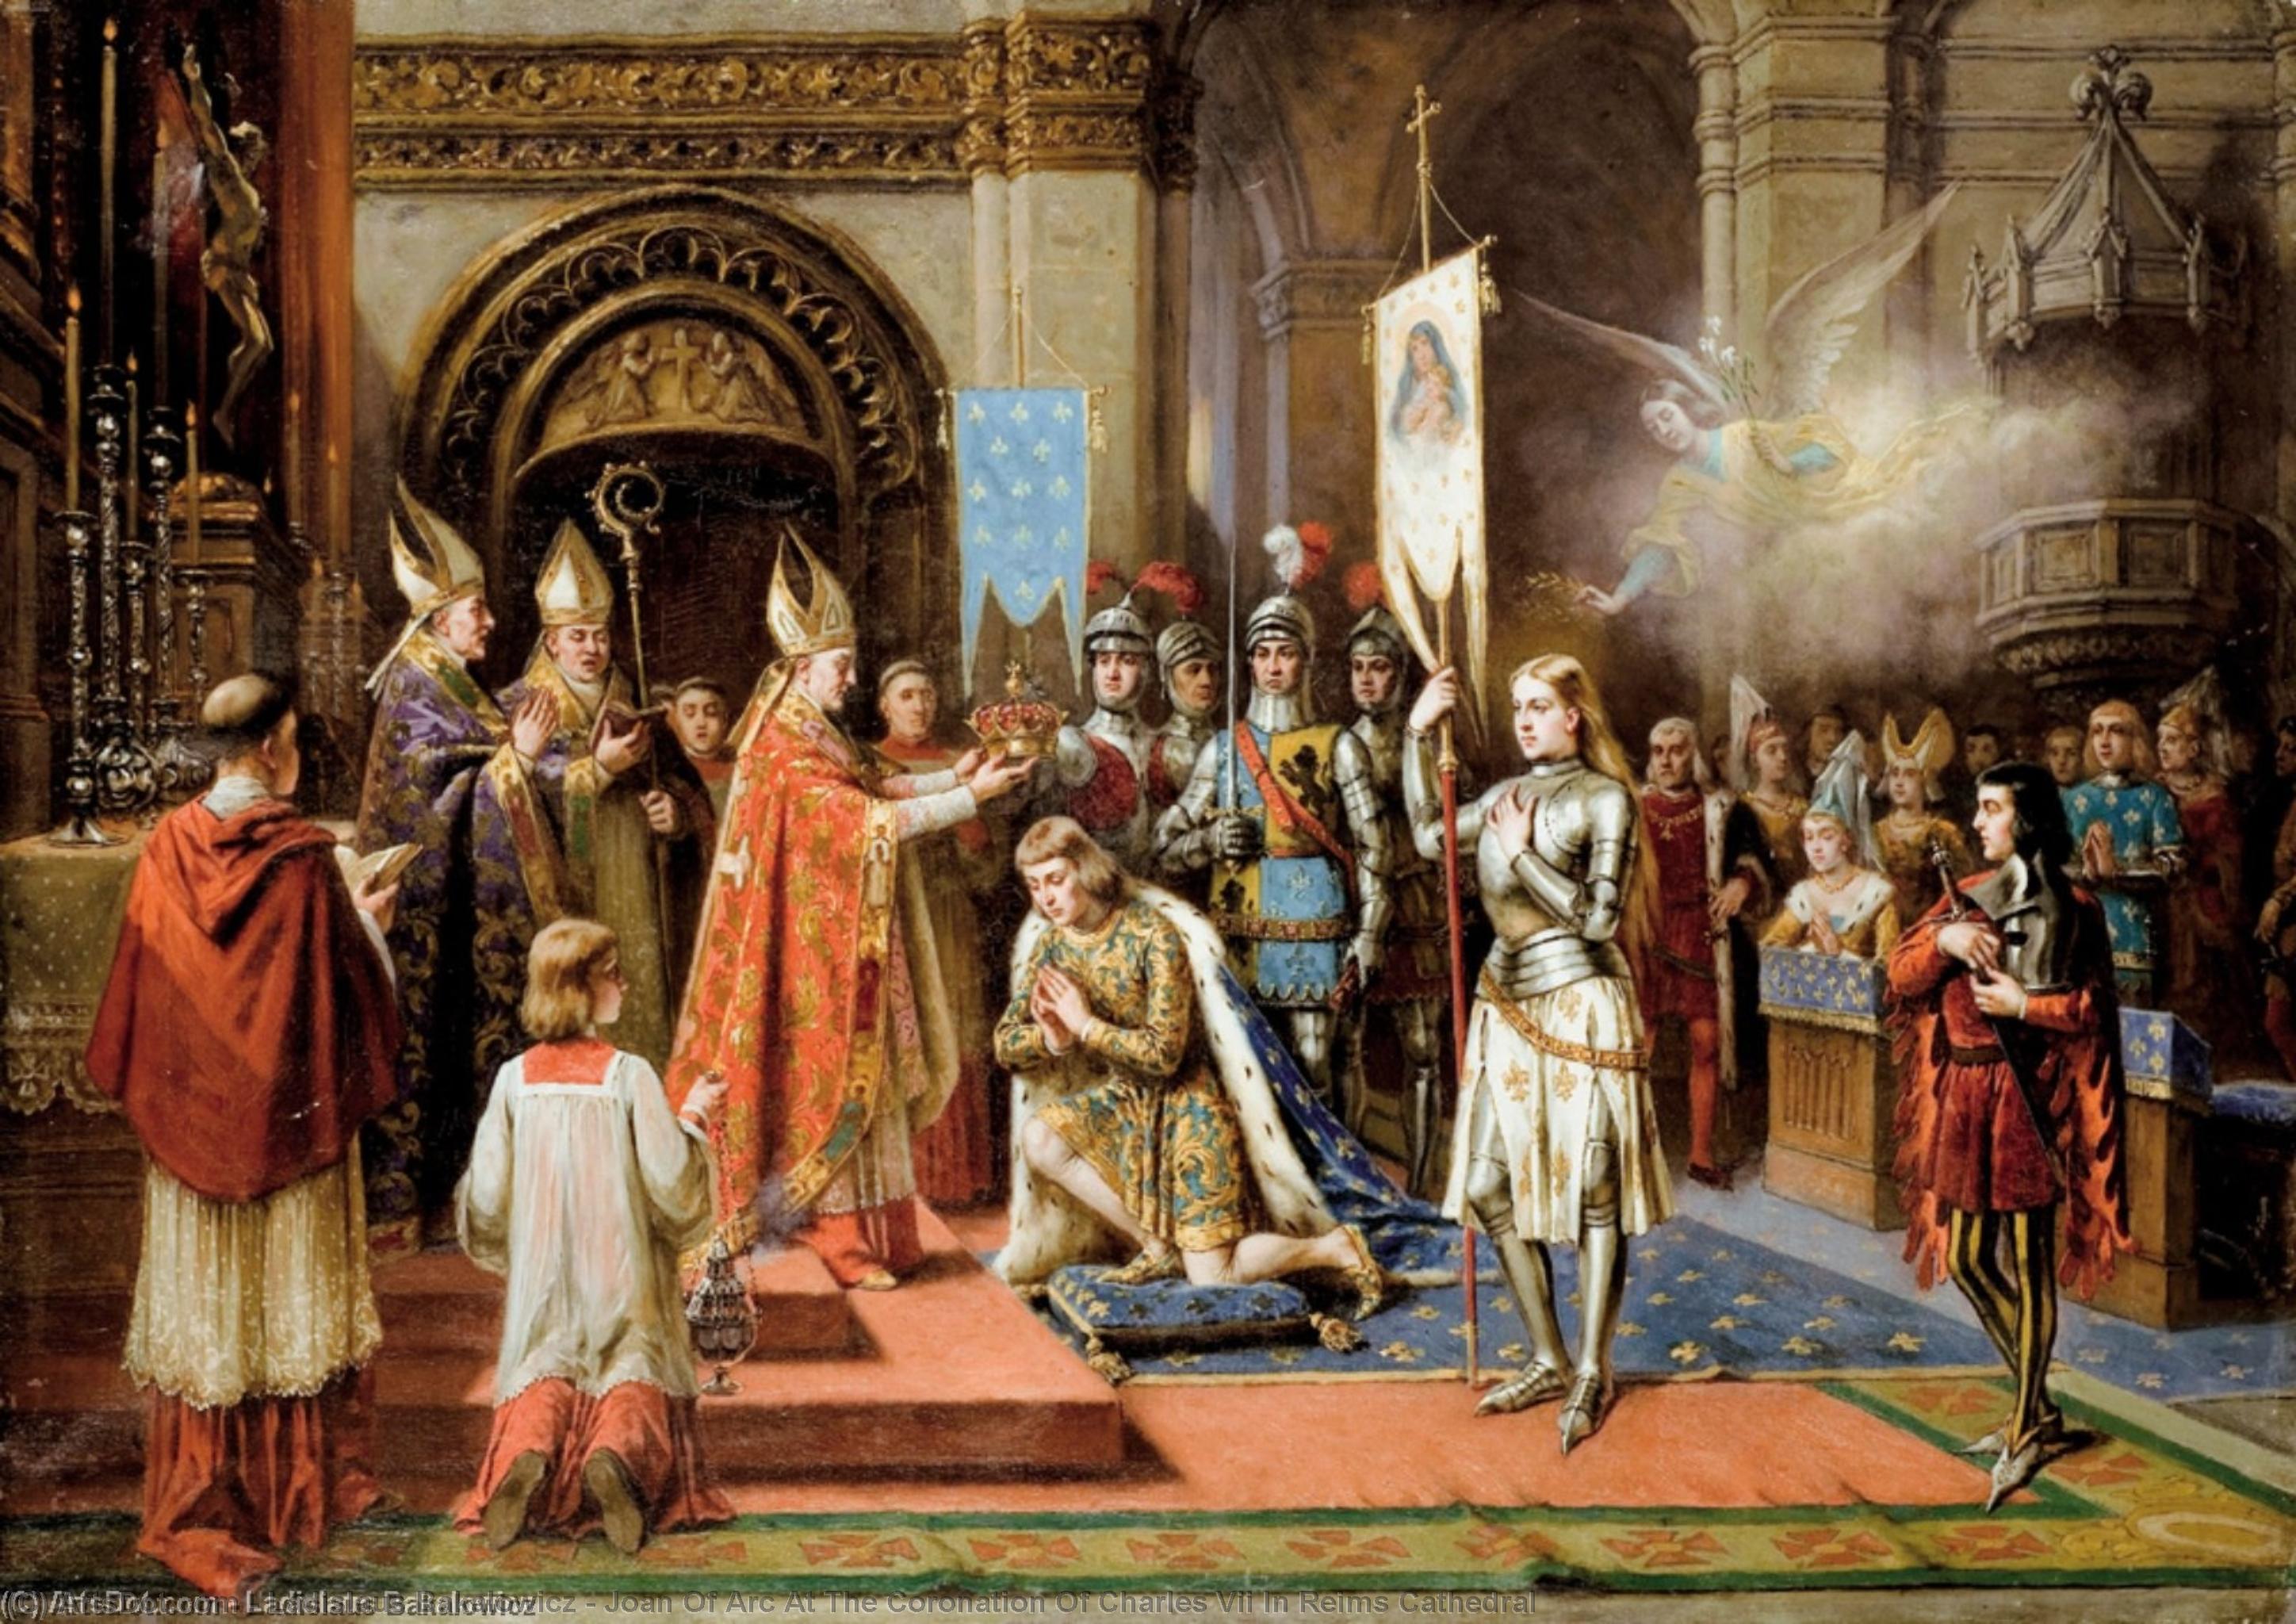 WikiOO.org - Encyclopedia of Fine Arts - Malba, Artwork Ladislaus Bakalowicz - Joan Of Arc At The Coronation Of Charles Vii In Reims Cathedral